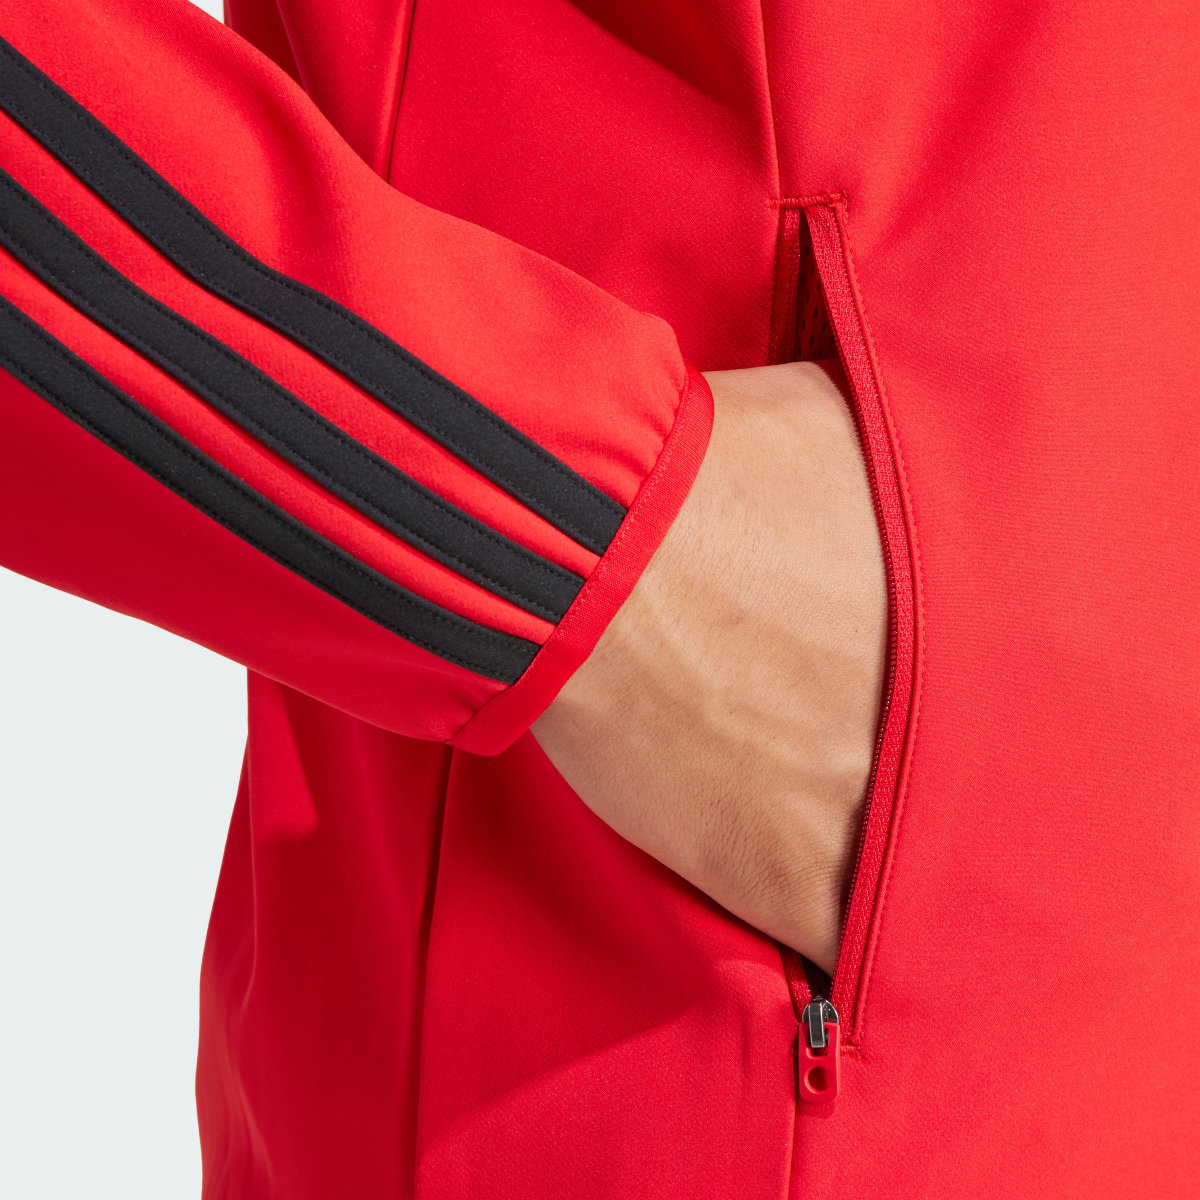 Adidas SST Bonded Track Top. 7